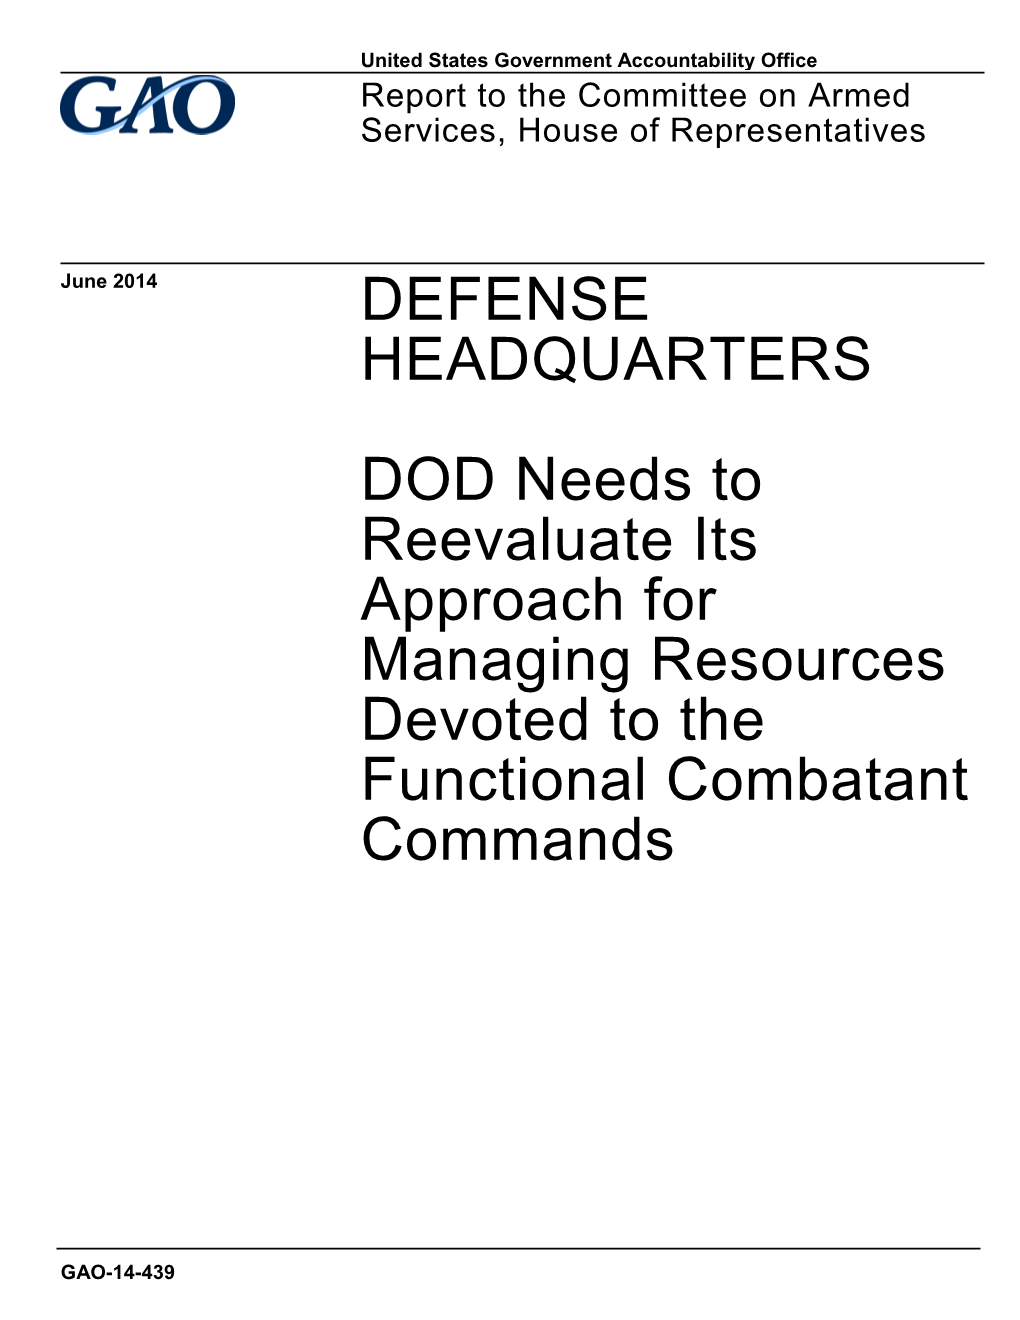 GAO-14-439, DEFENSE HEADQUARTERS: DOD Needs to Reevaluate Its Approach for Managing Resources Devoted to the Functional Combatan